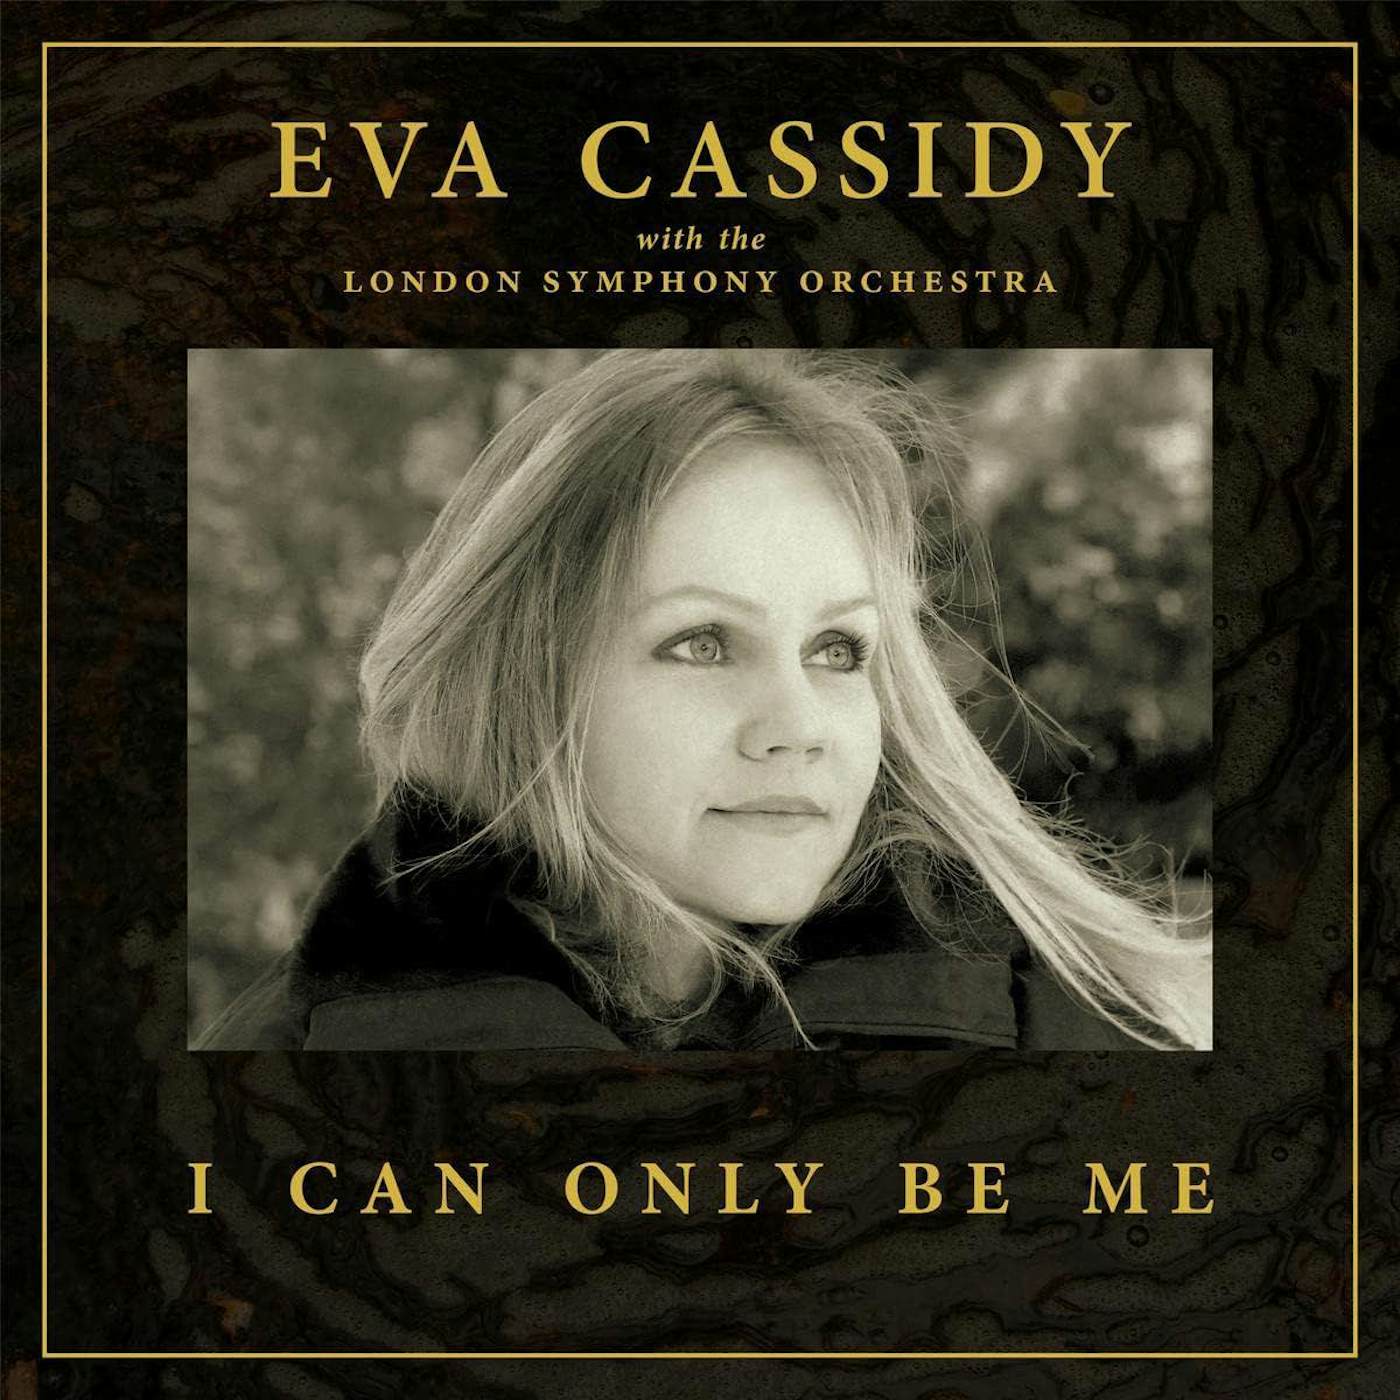 Eva Cassidy I CAN ONLY BE ME (DELUXE/180G/2LP/45RPM) Vinyl Record